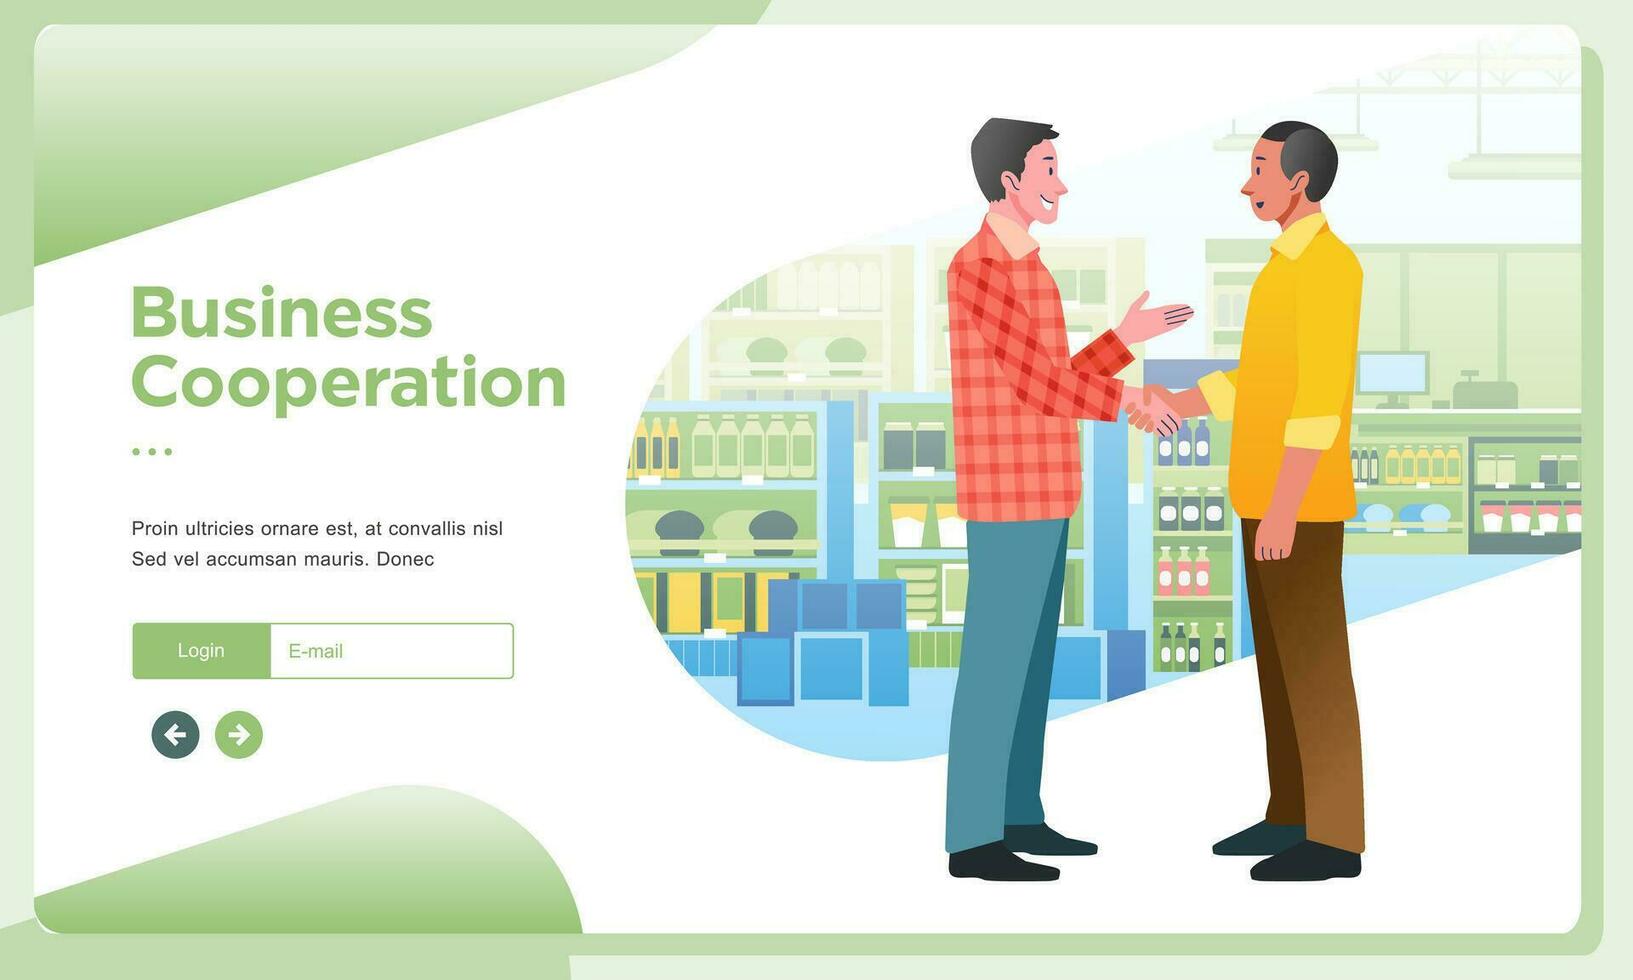 Landing page banners. Entrepreneurs and investors shake hands, into a cooperation agreement to develop the retail business vector